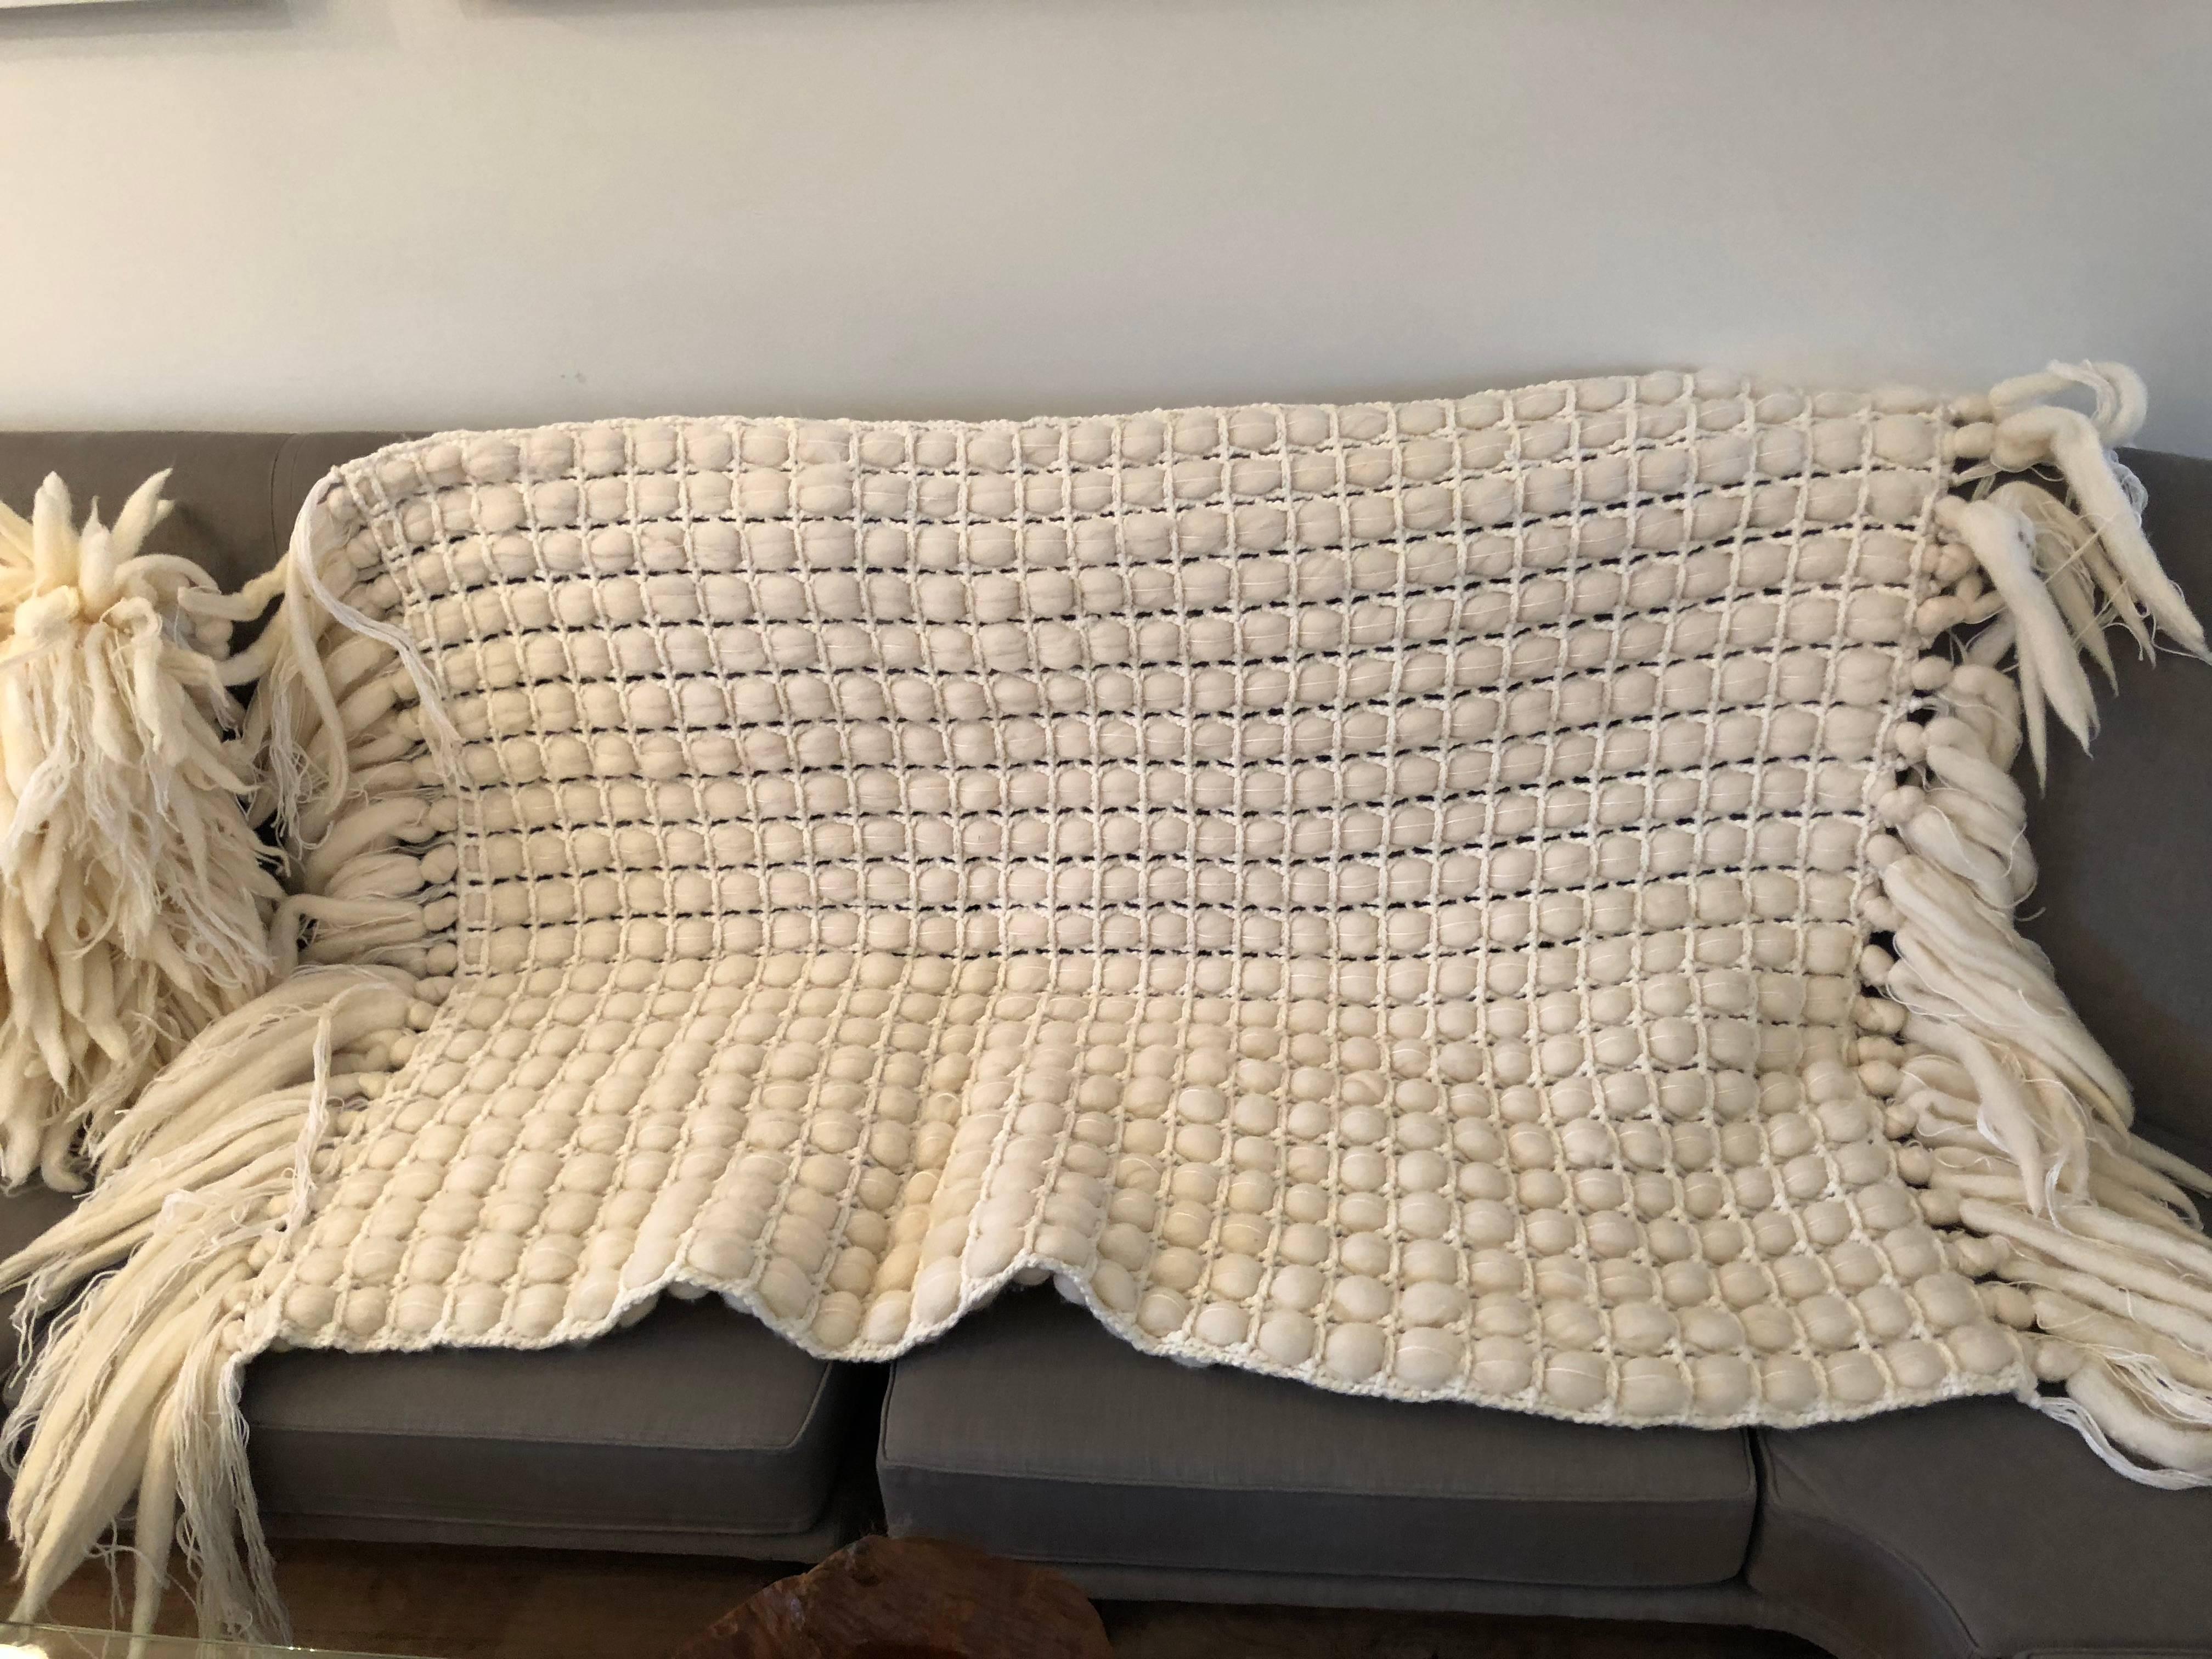 Handwoven, hand-knotted and tufted Italian Merino Wool Throw with knotted fringe border at top and bottom. Custom sizes available. Made in Italy.